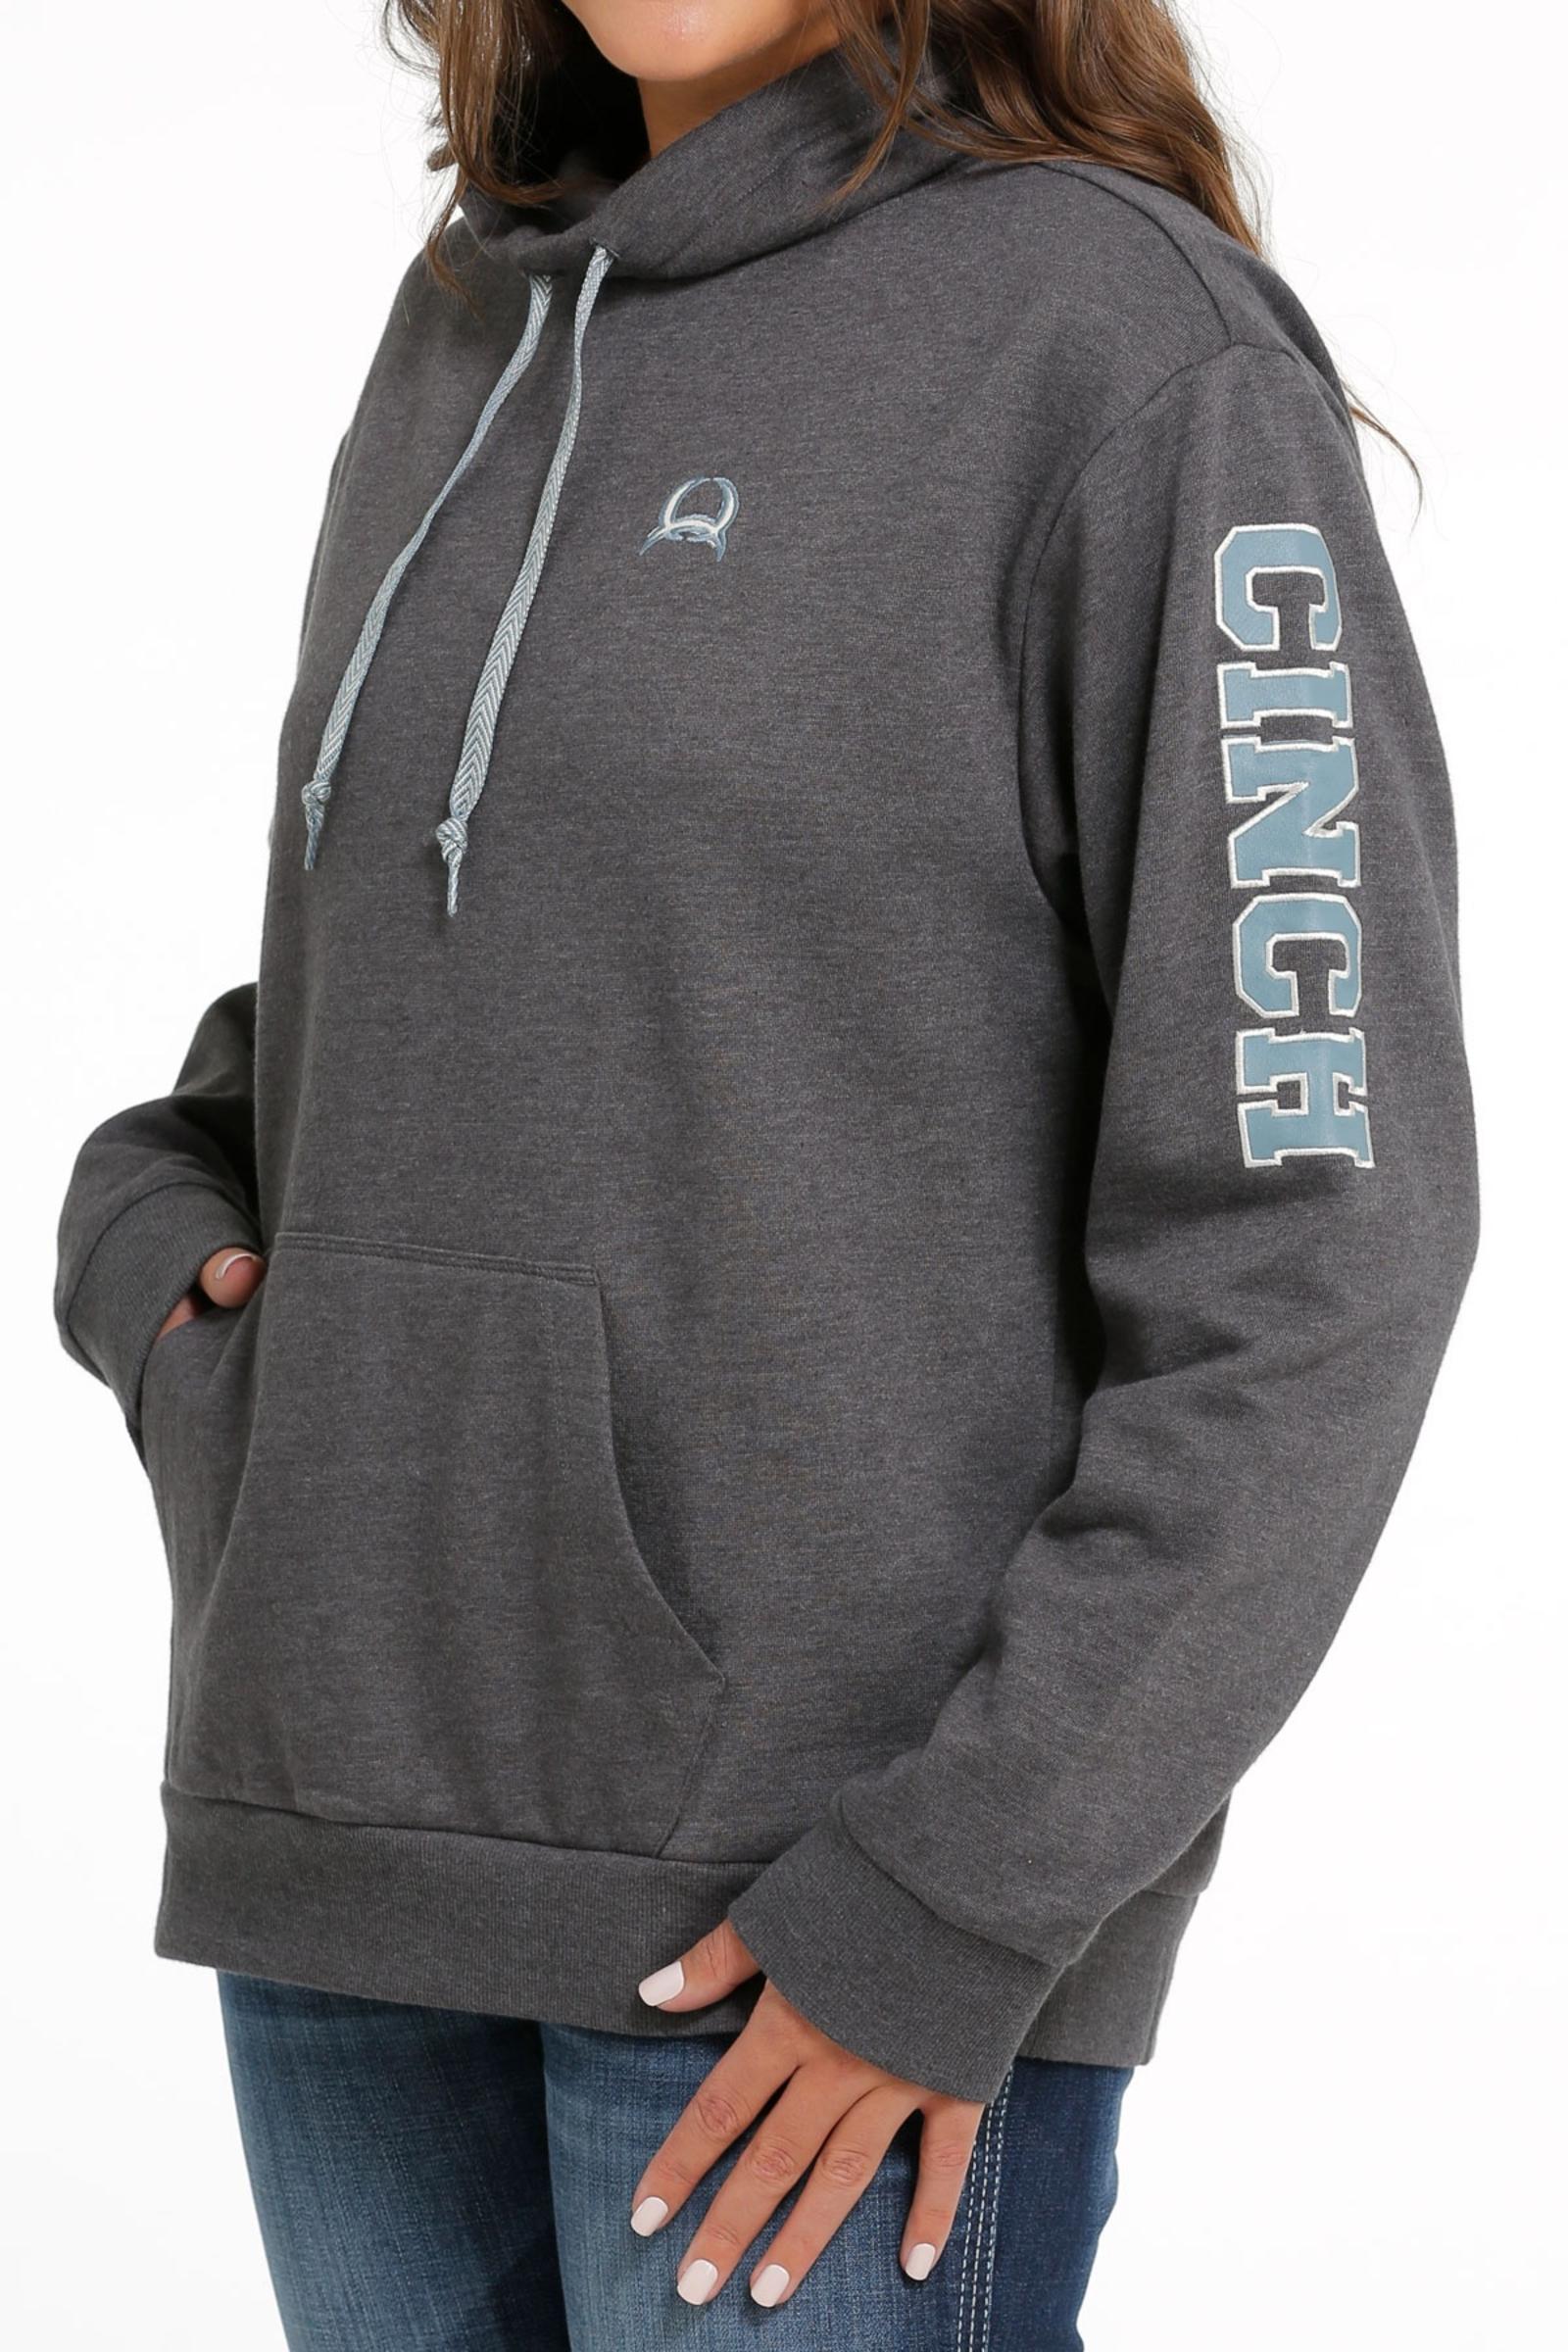 Cinch Jeans Women's French Terry Pullover - Gray